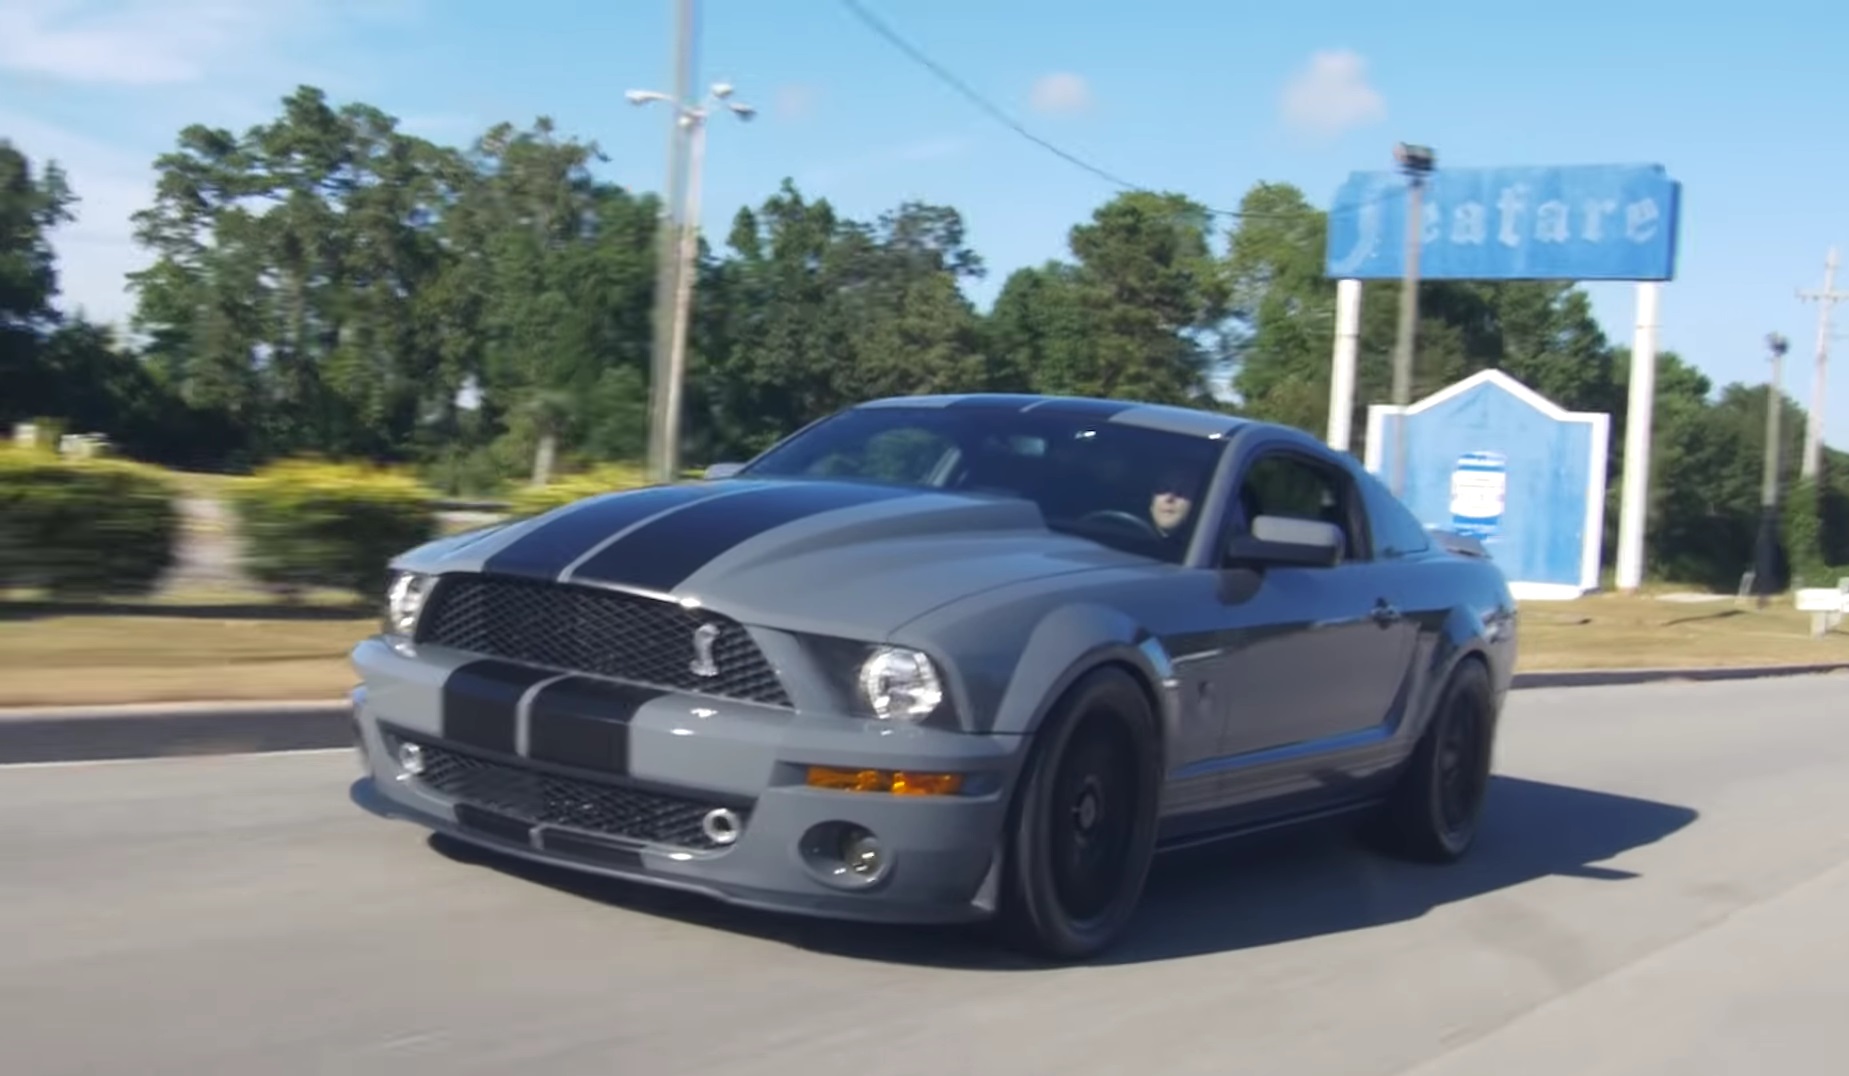 Video: 800 HP 2008 Ford Mustang Shelby GT500 Super Snake In-Depth Review